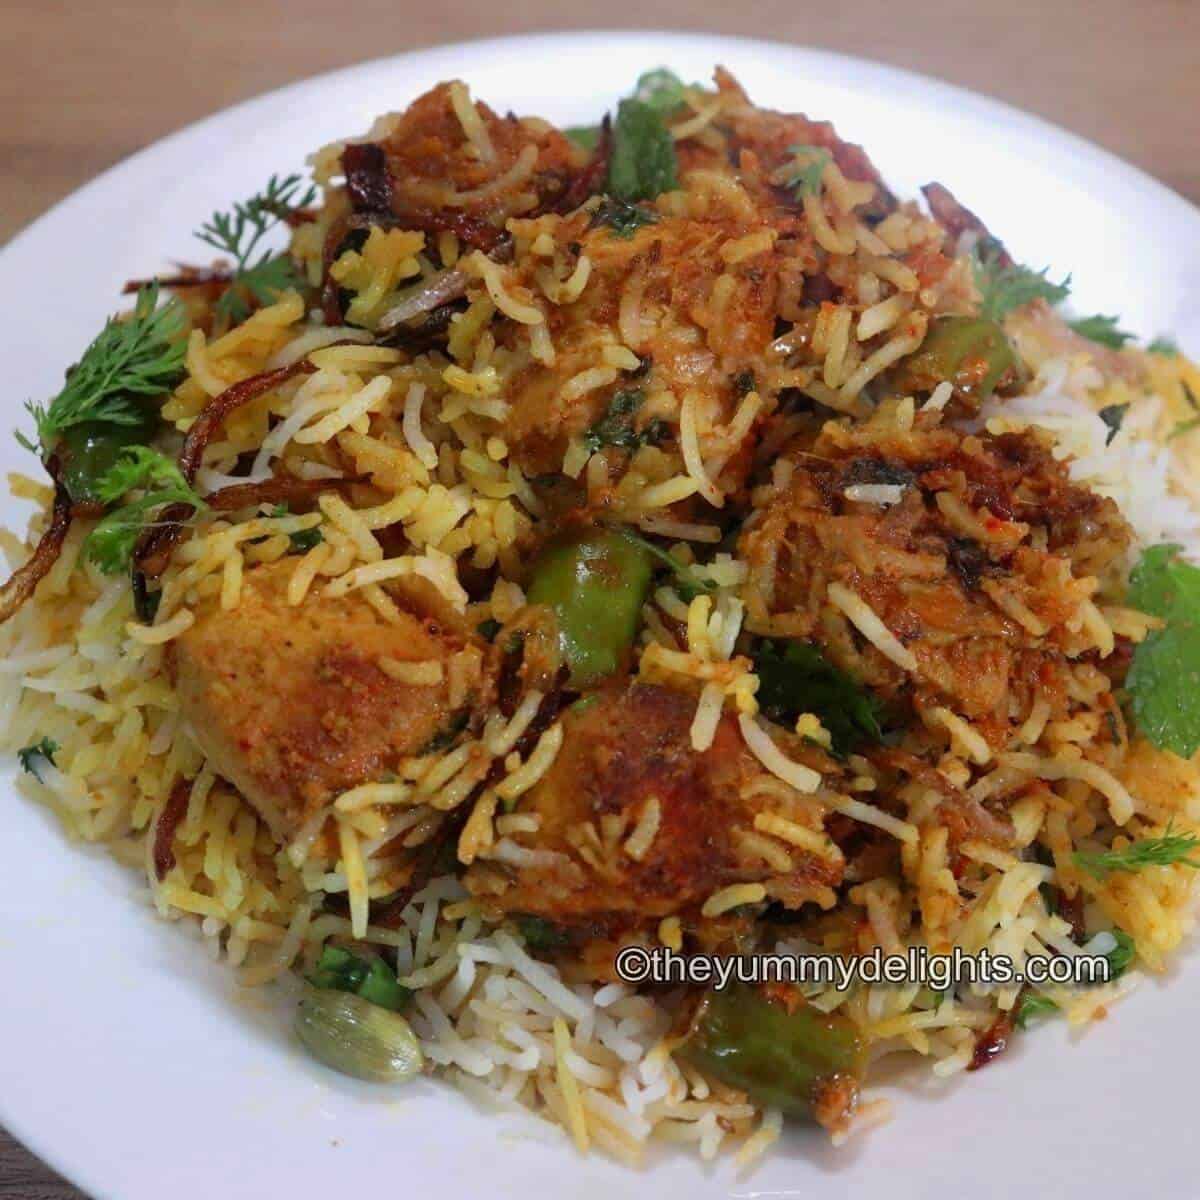 close-up image of chicken tikka biryani served in a white plate. Garnished with fried onions, mint and coriander leaves.